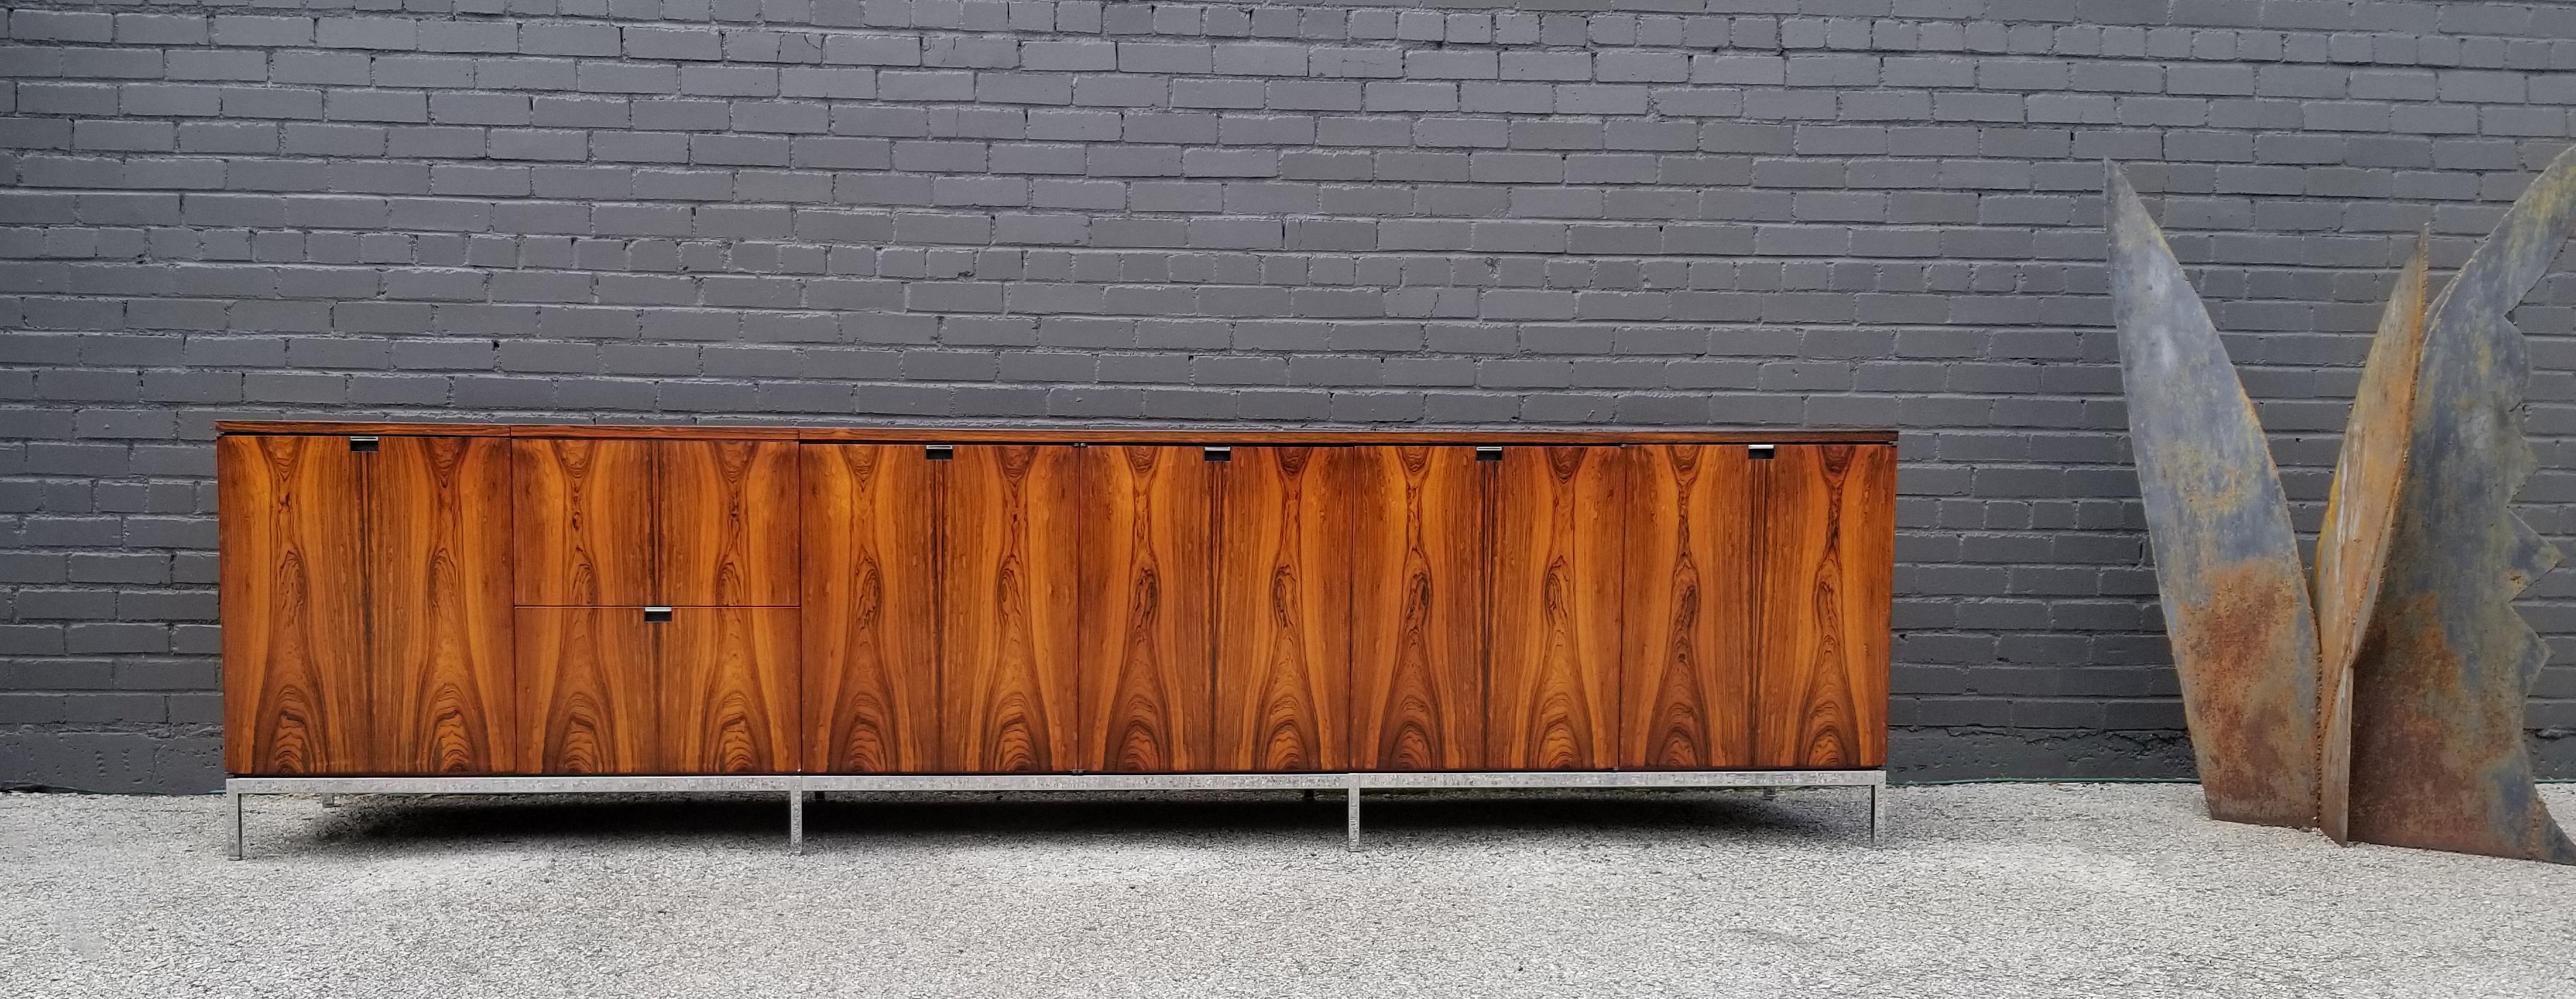 This monumentally proportioned media console was custom ordered by an east coast architect for his personal estate. It is much more generously proportioned than the average scale Knoll credenza. It is taller, deeper and much longer. The exotic